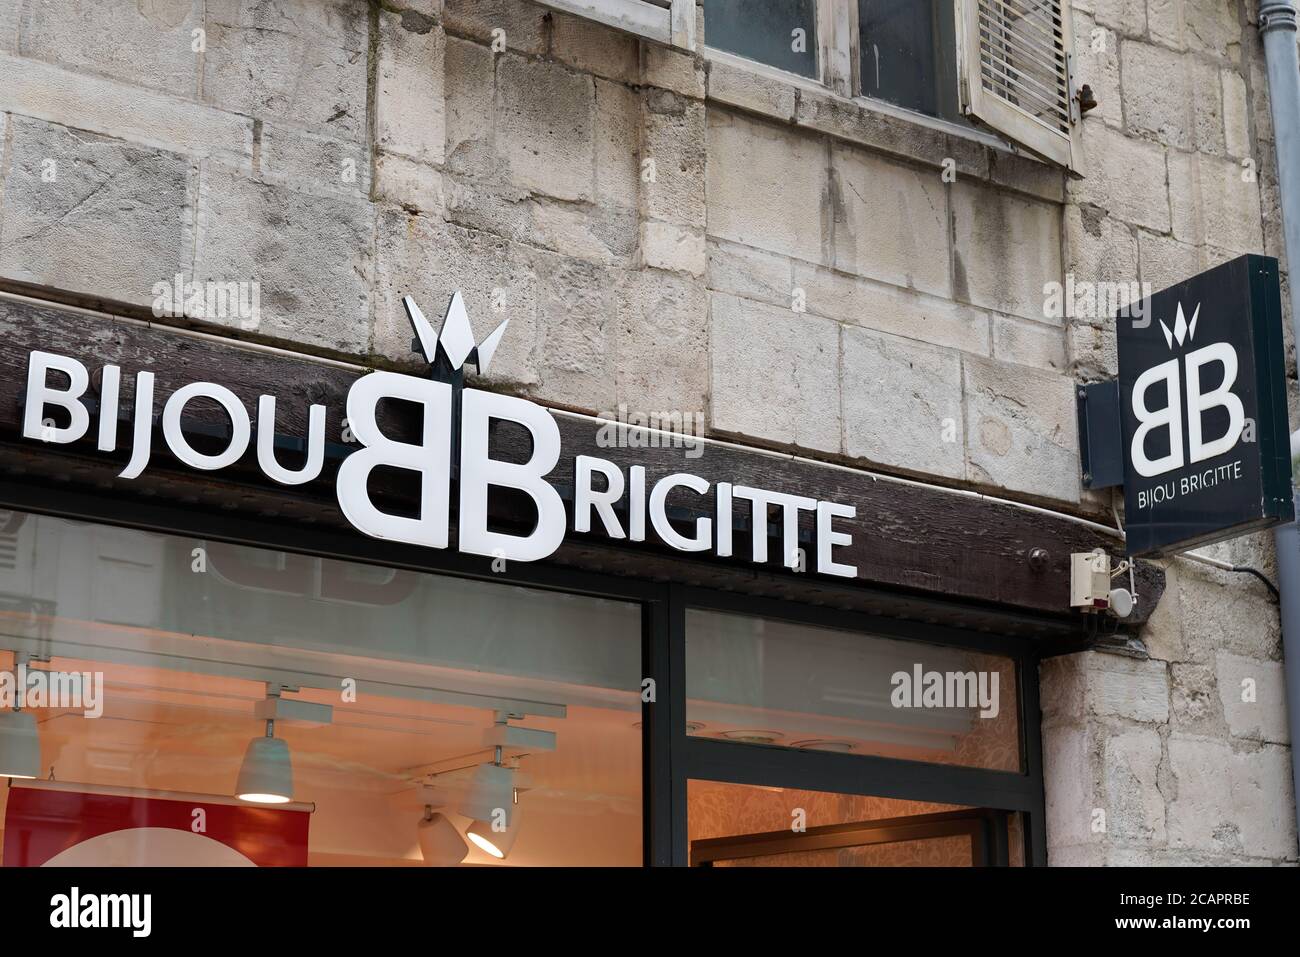 Bijou Boutique High Resolution Stock Photography and Images - Alamy